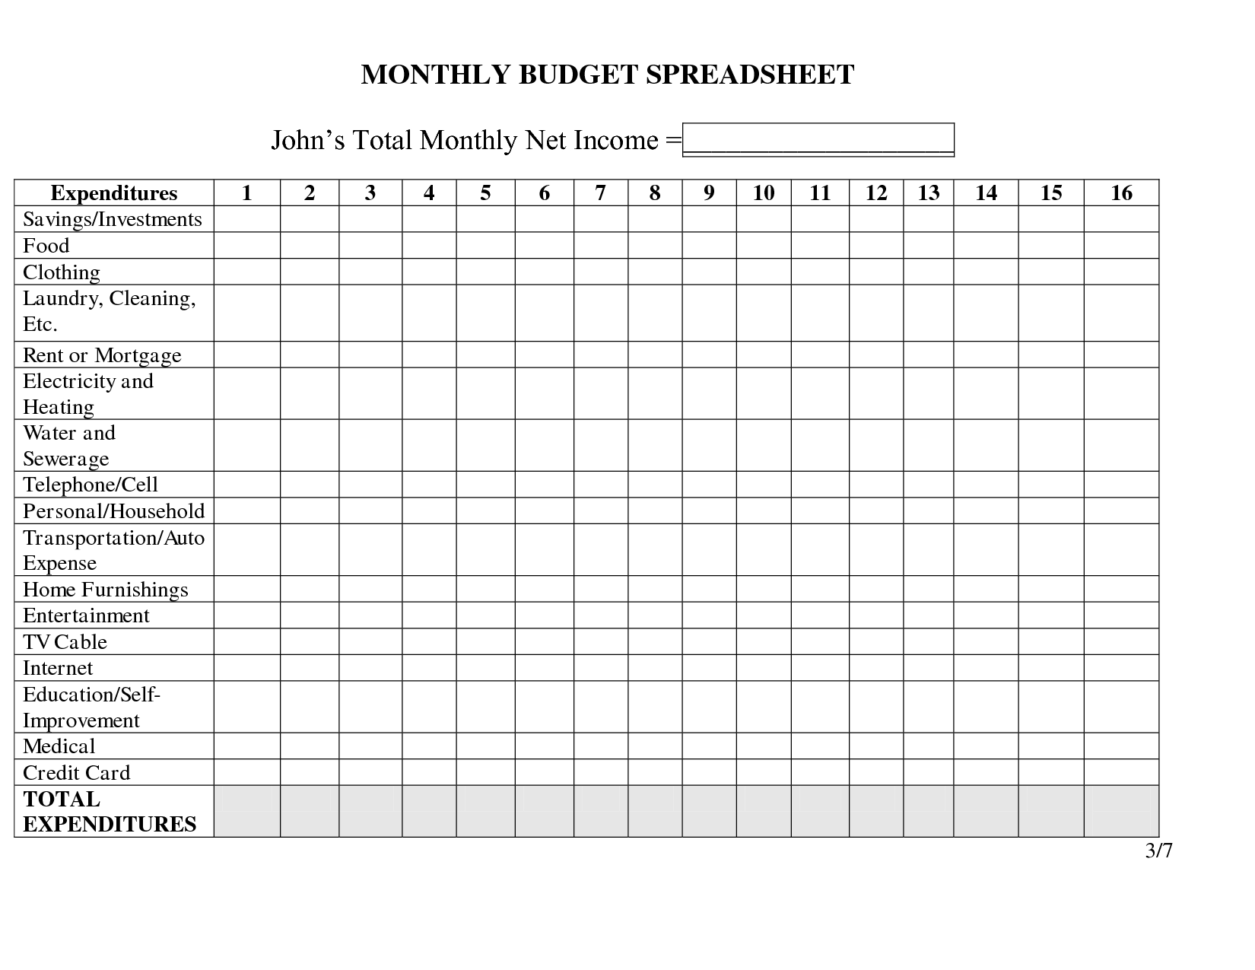 family-reunion-spreadsheet-payment-spreadshee-family-reunion-budget-spreadsheet-family-reunion